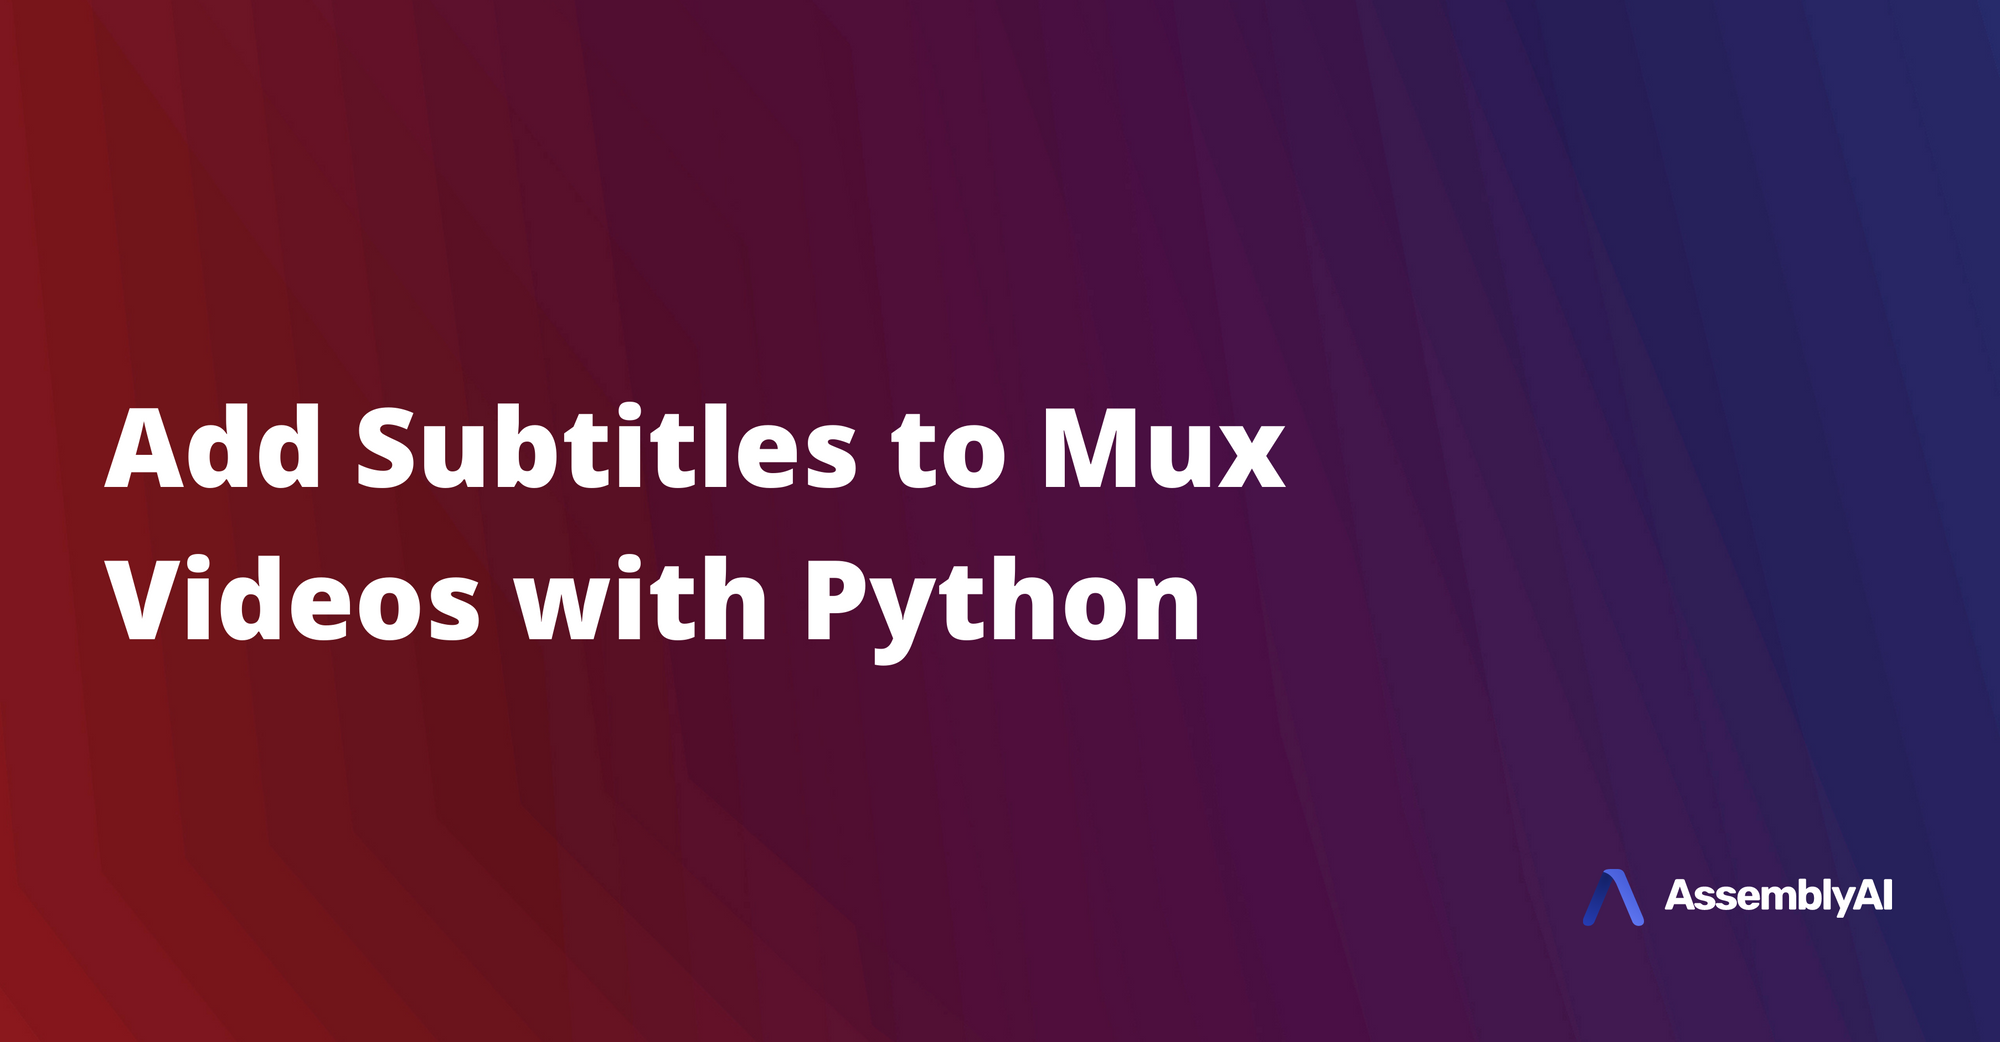 How to Add Subtitles to Mux Videos with Python